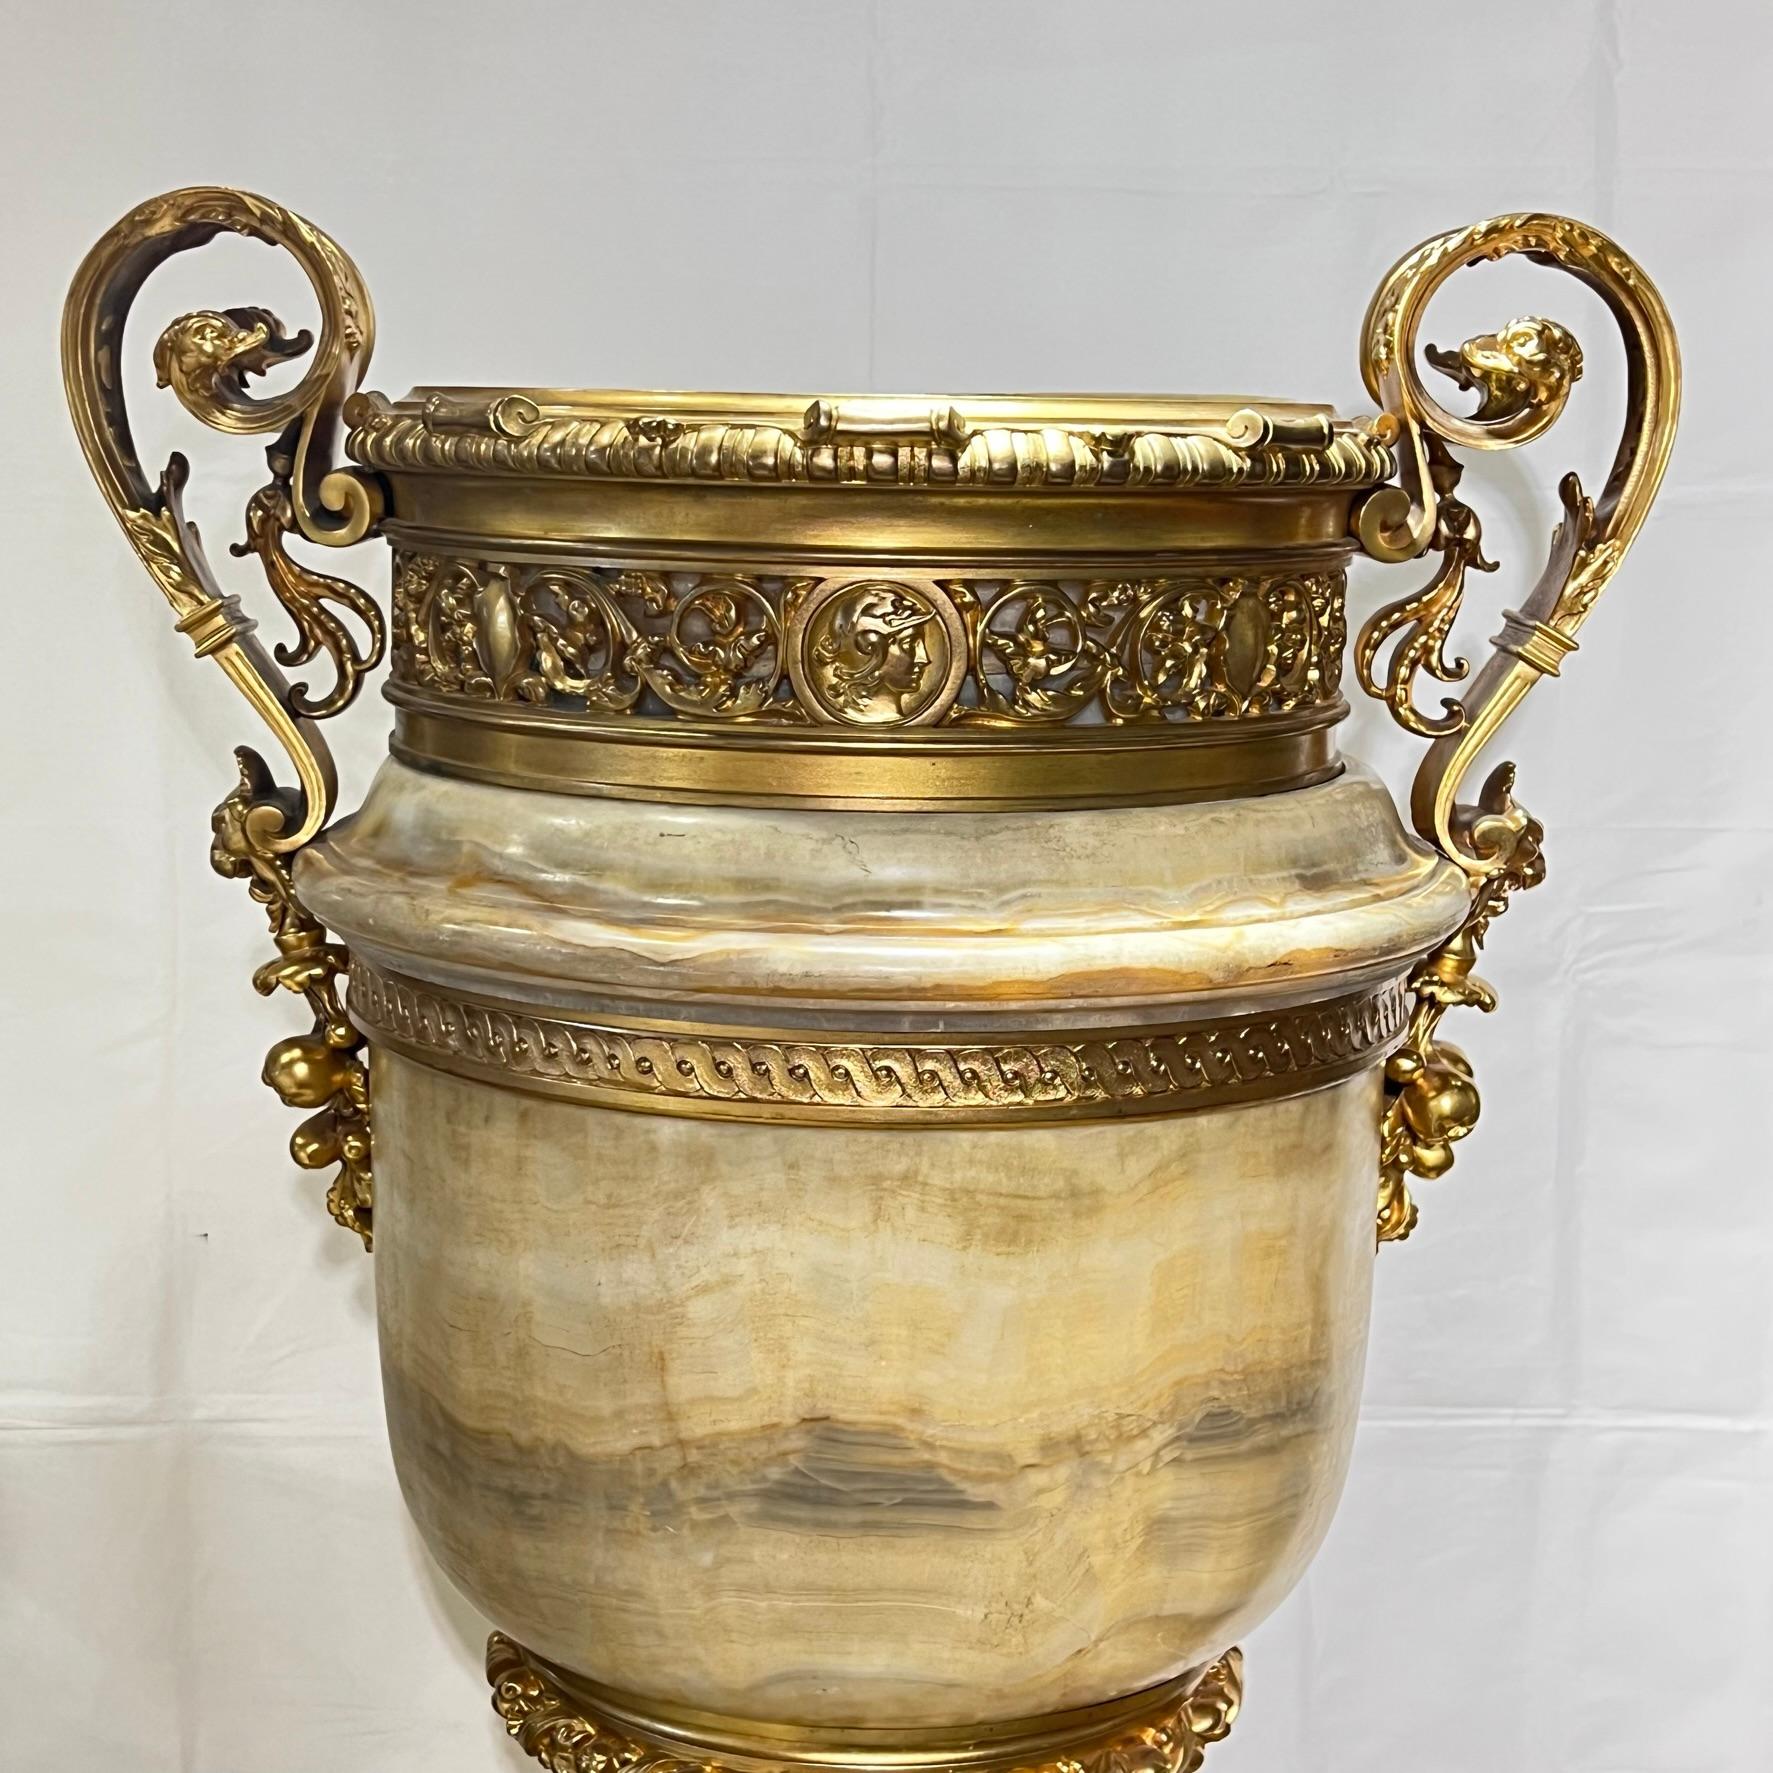 Monumental 19th Century French Neoclassical Onyx and Gilt Bronze Vase For Sale 1